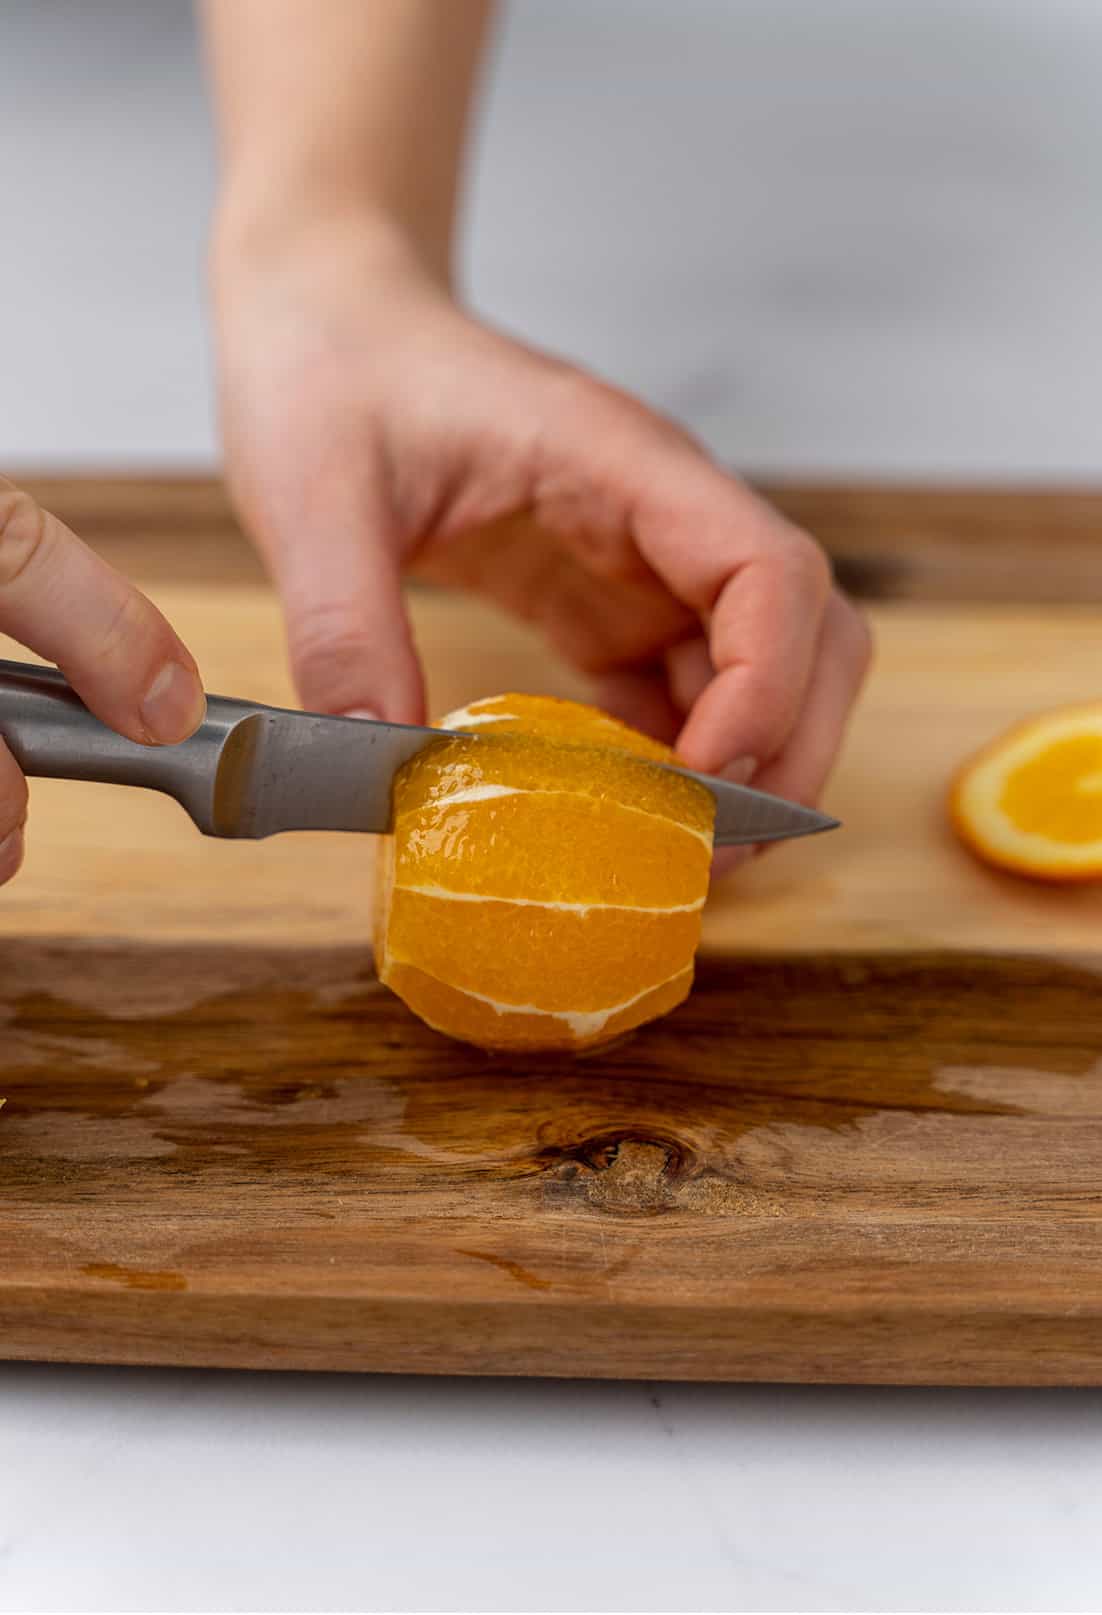 slicing through the orange with knife on cutting board 